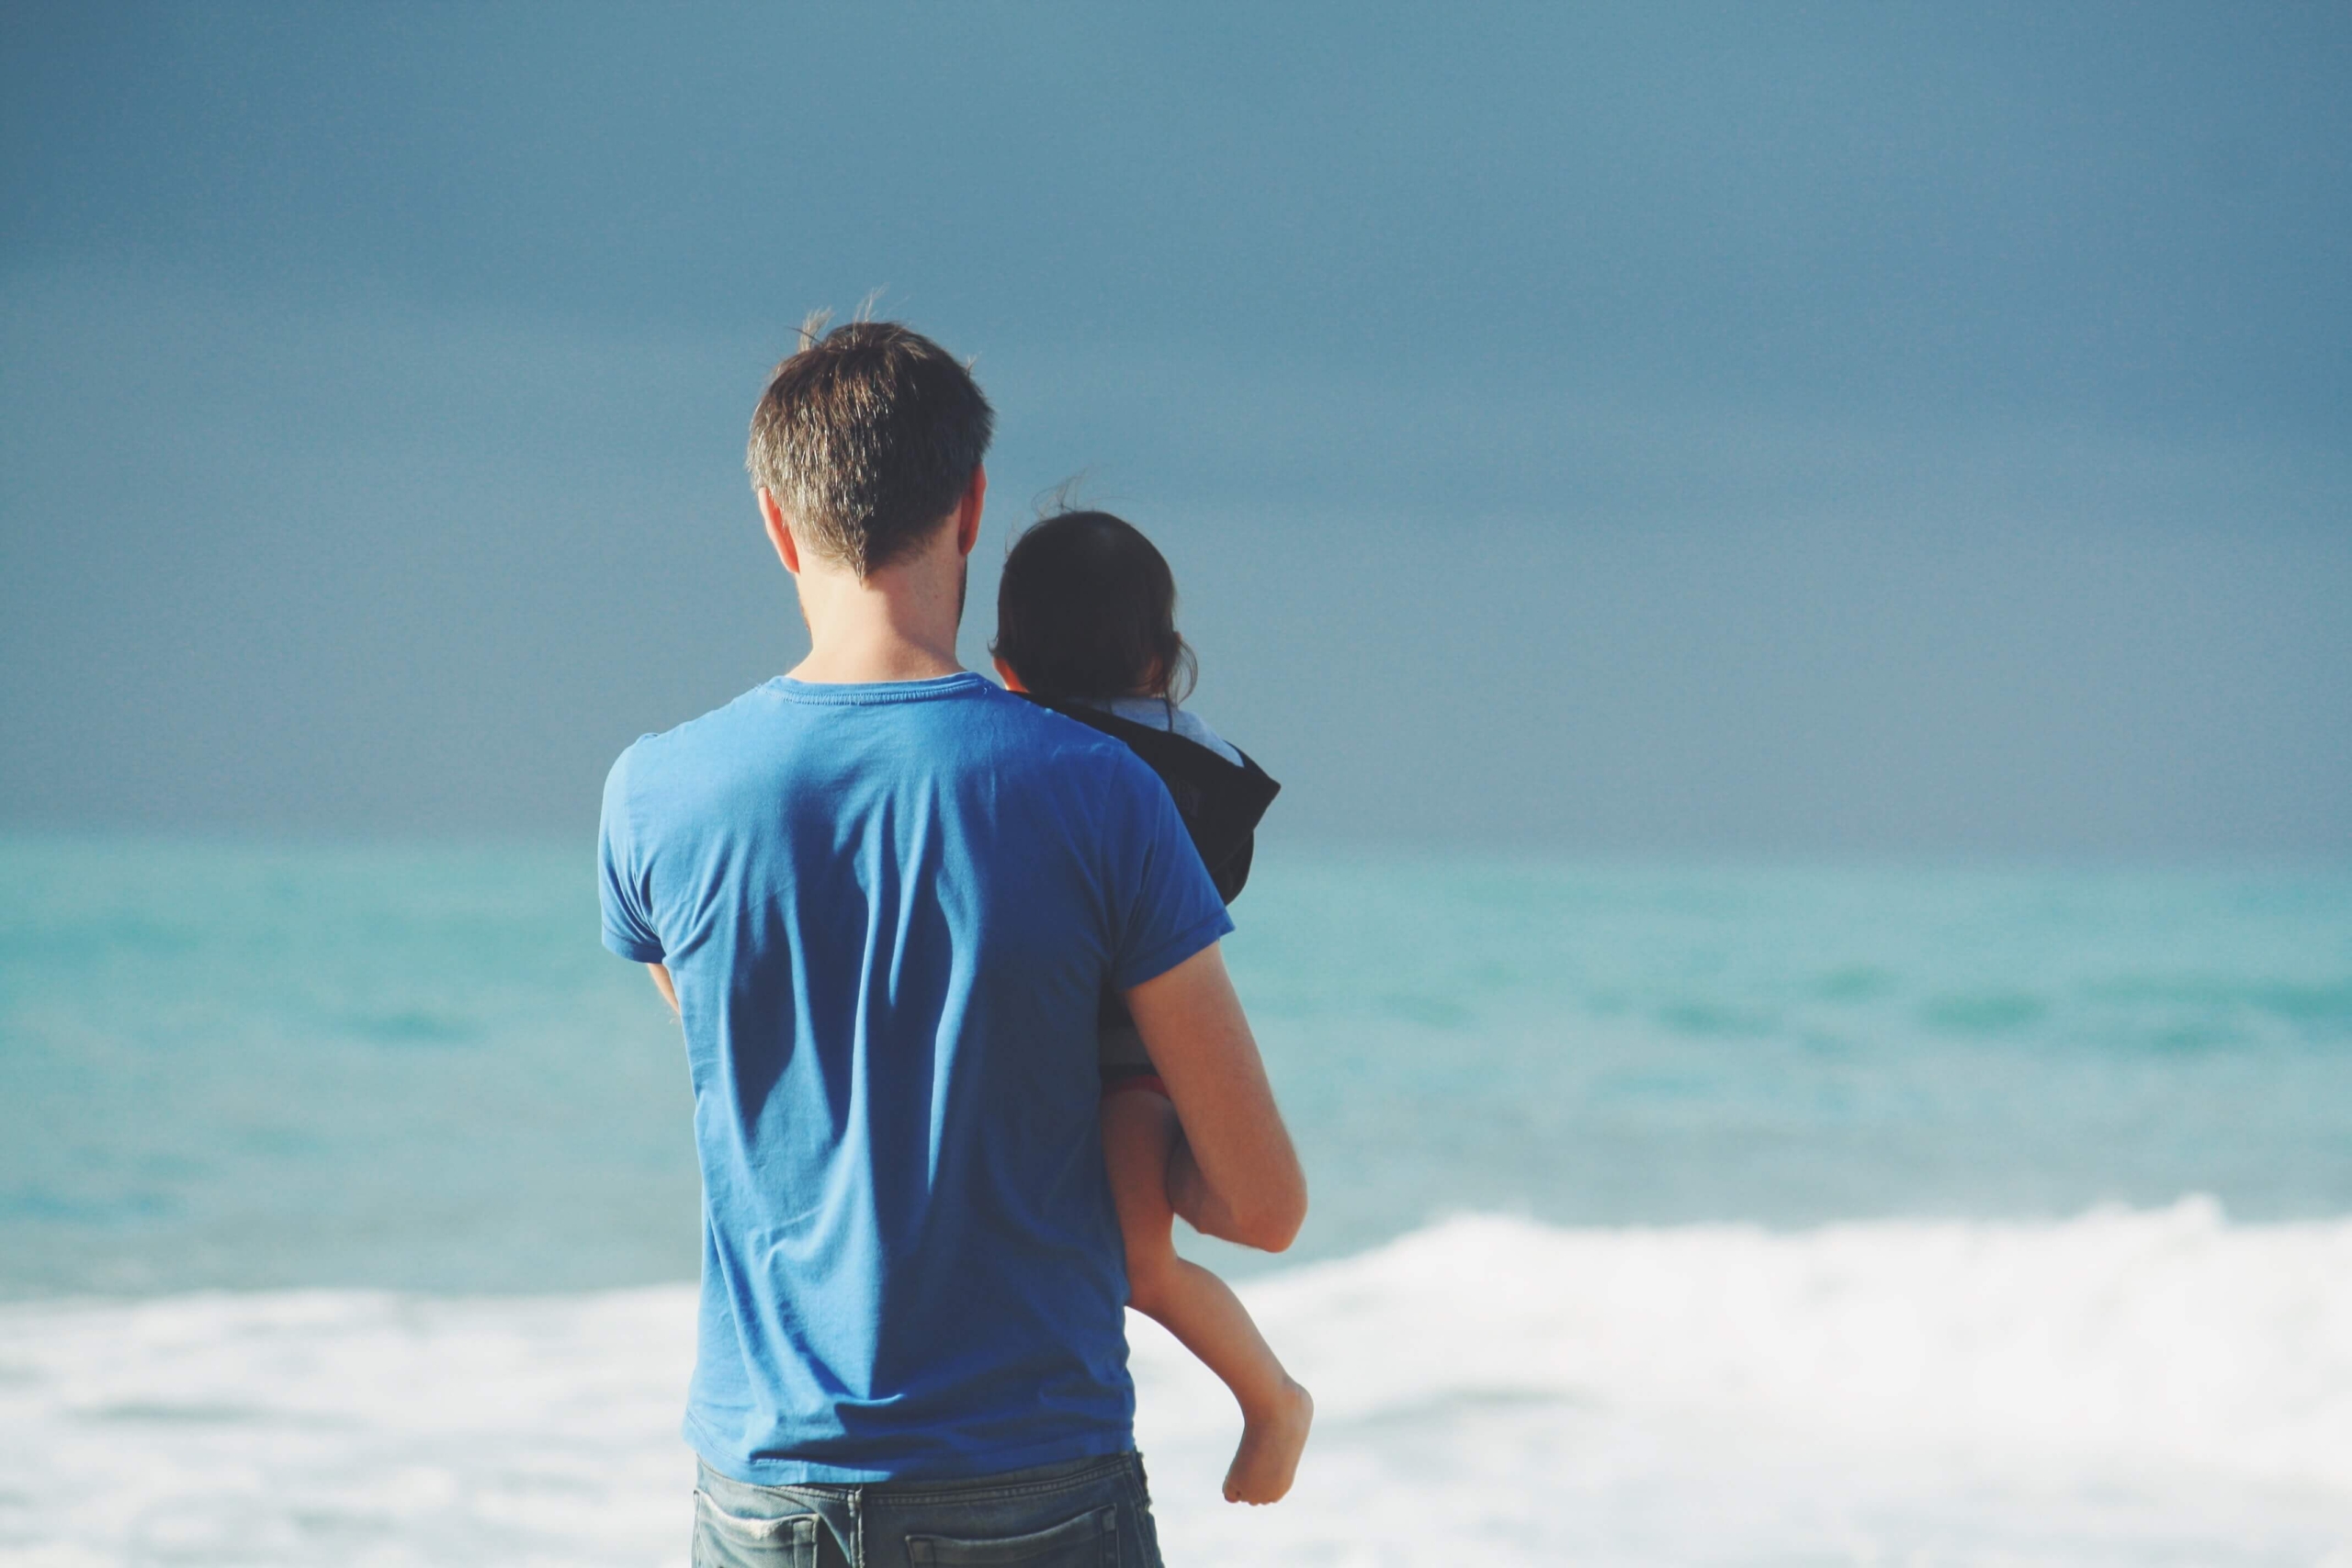 Parenting advice from 10 real dads